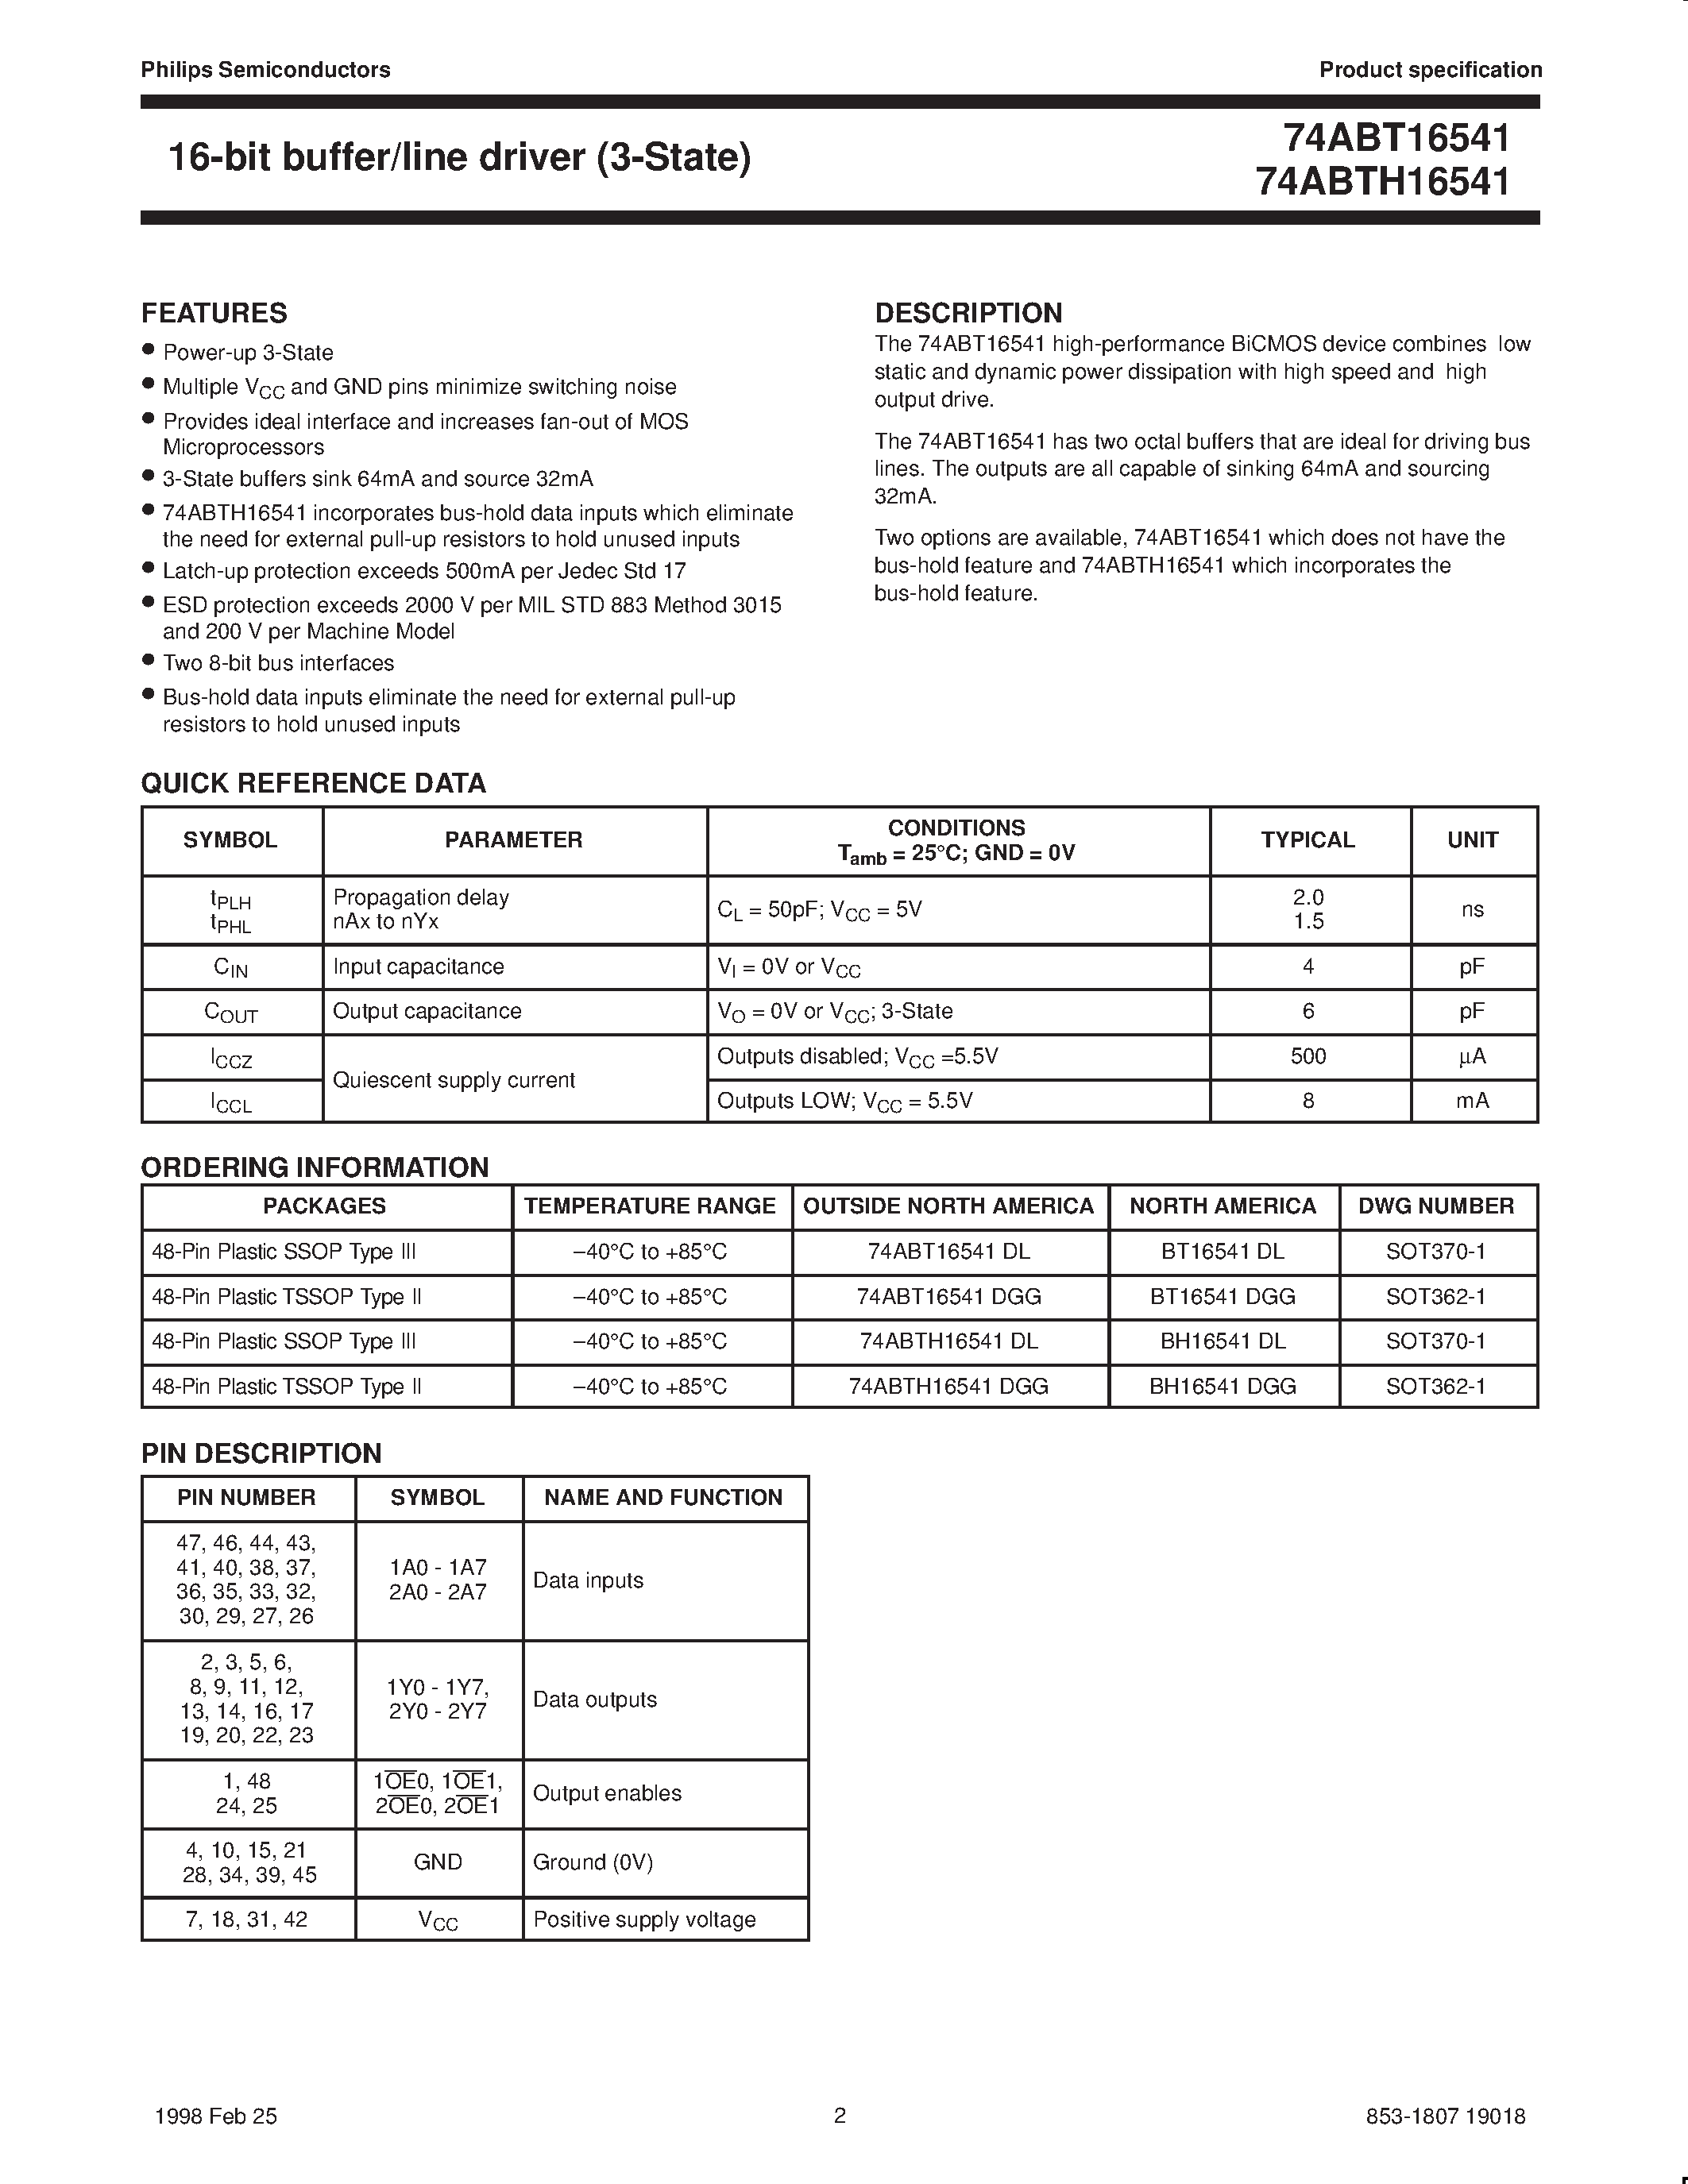 Datasheet 74ABTH16541DL - 16-bit buffer/line driver 3-State page 2